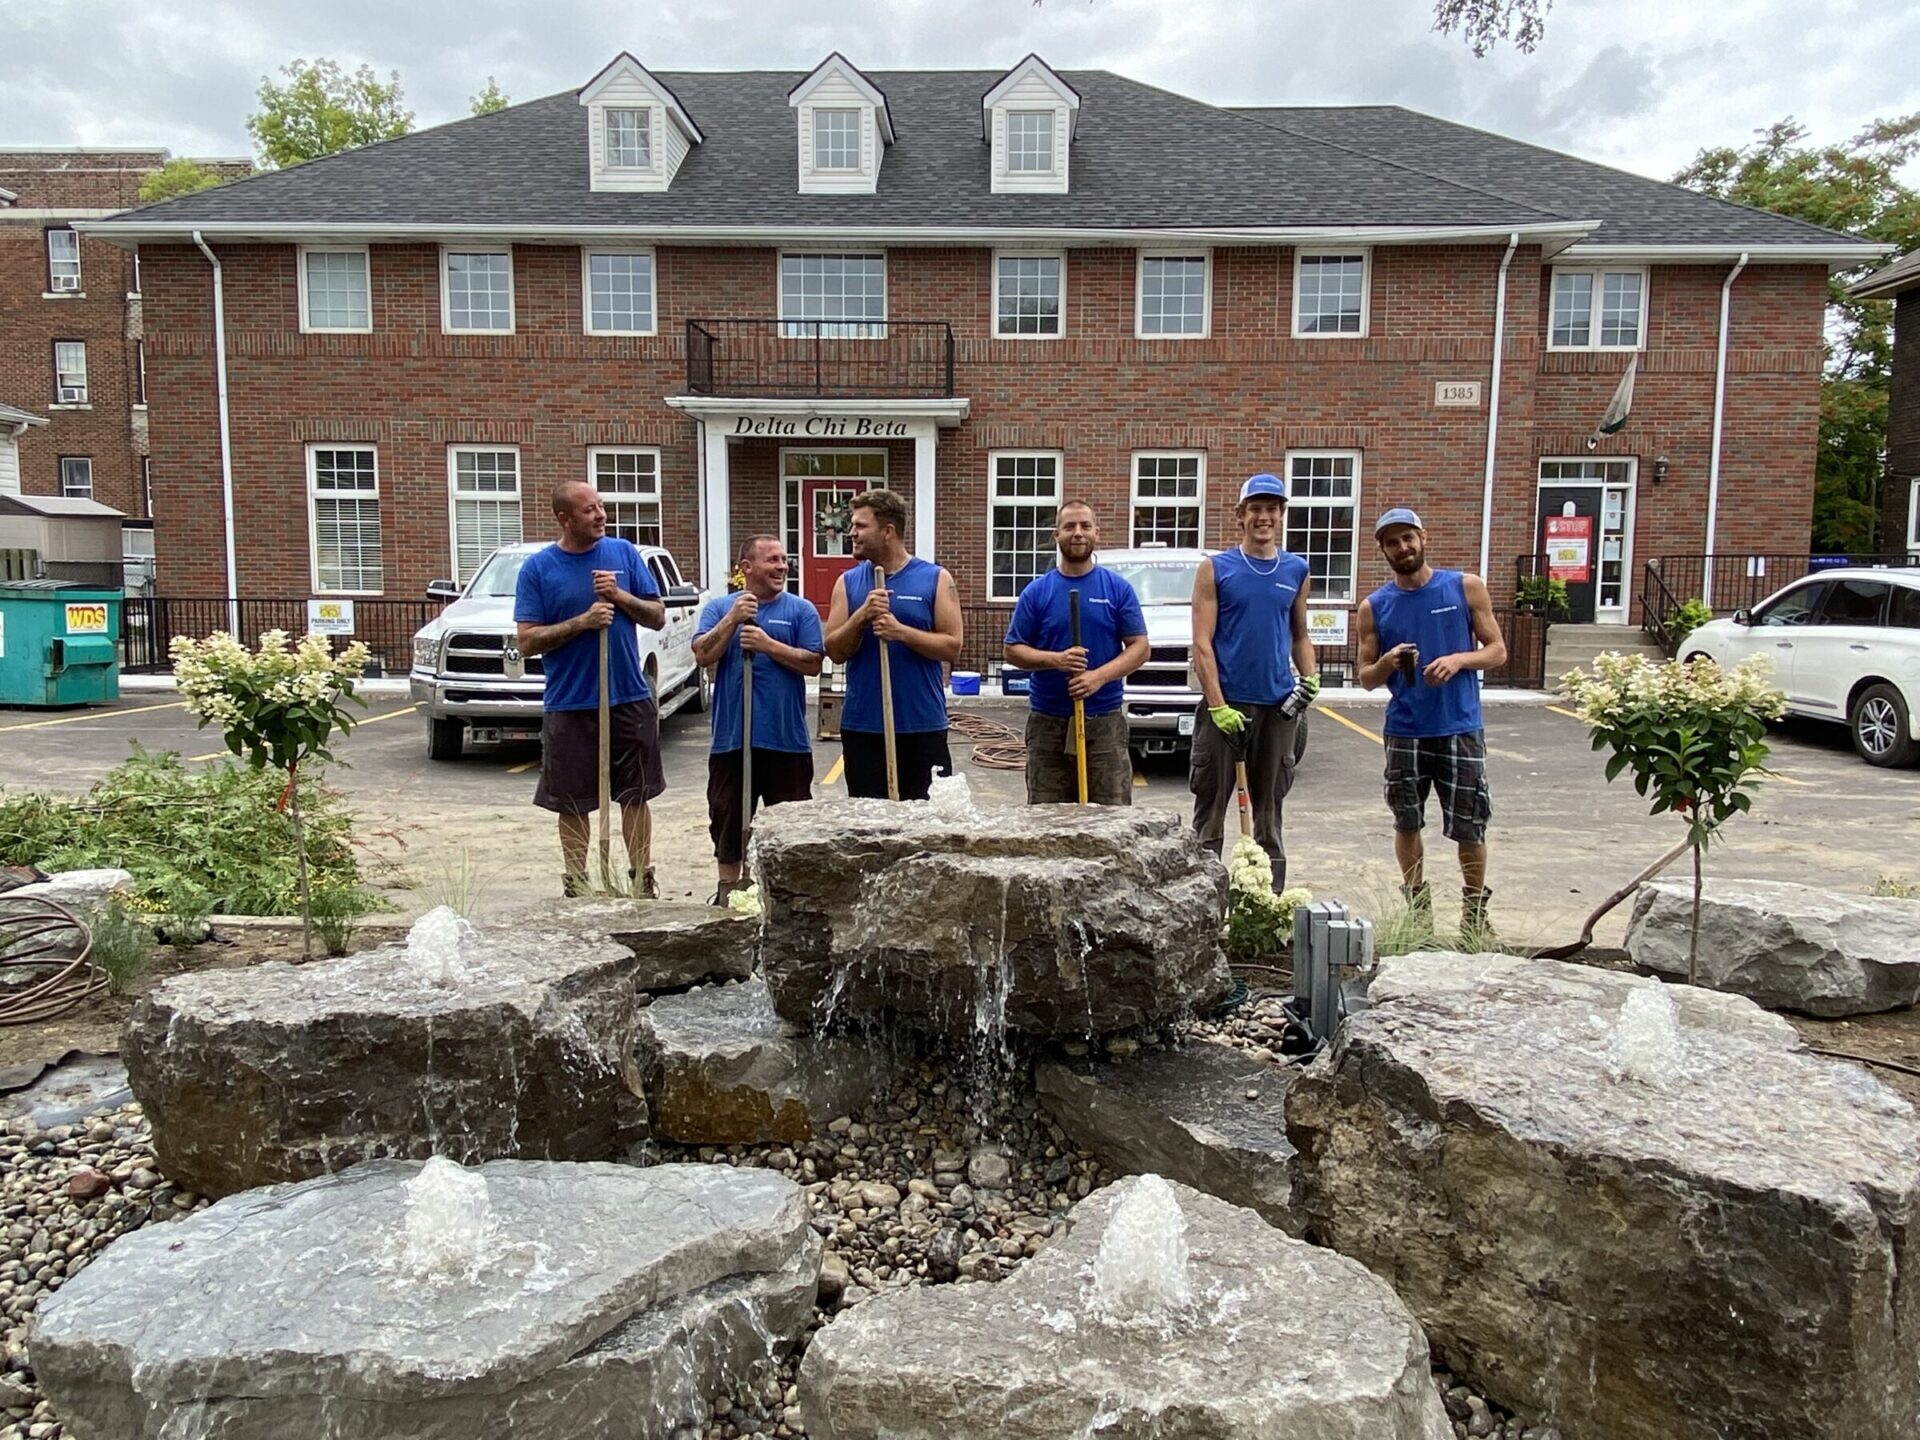 Five people stand near a water feature composed of rocks and cascading water. They wear matching blue shirts, potentially indicating a team or work crew.